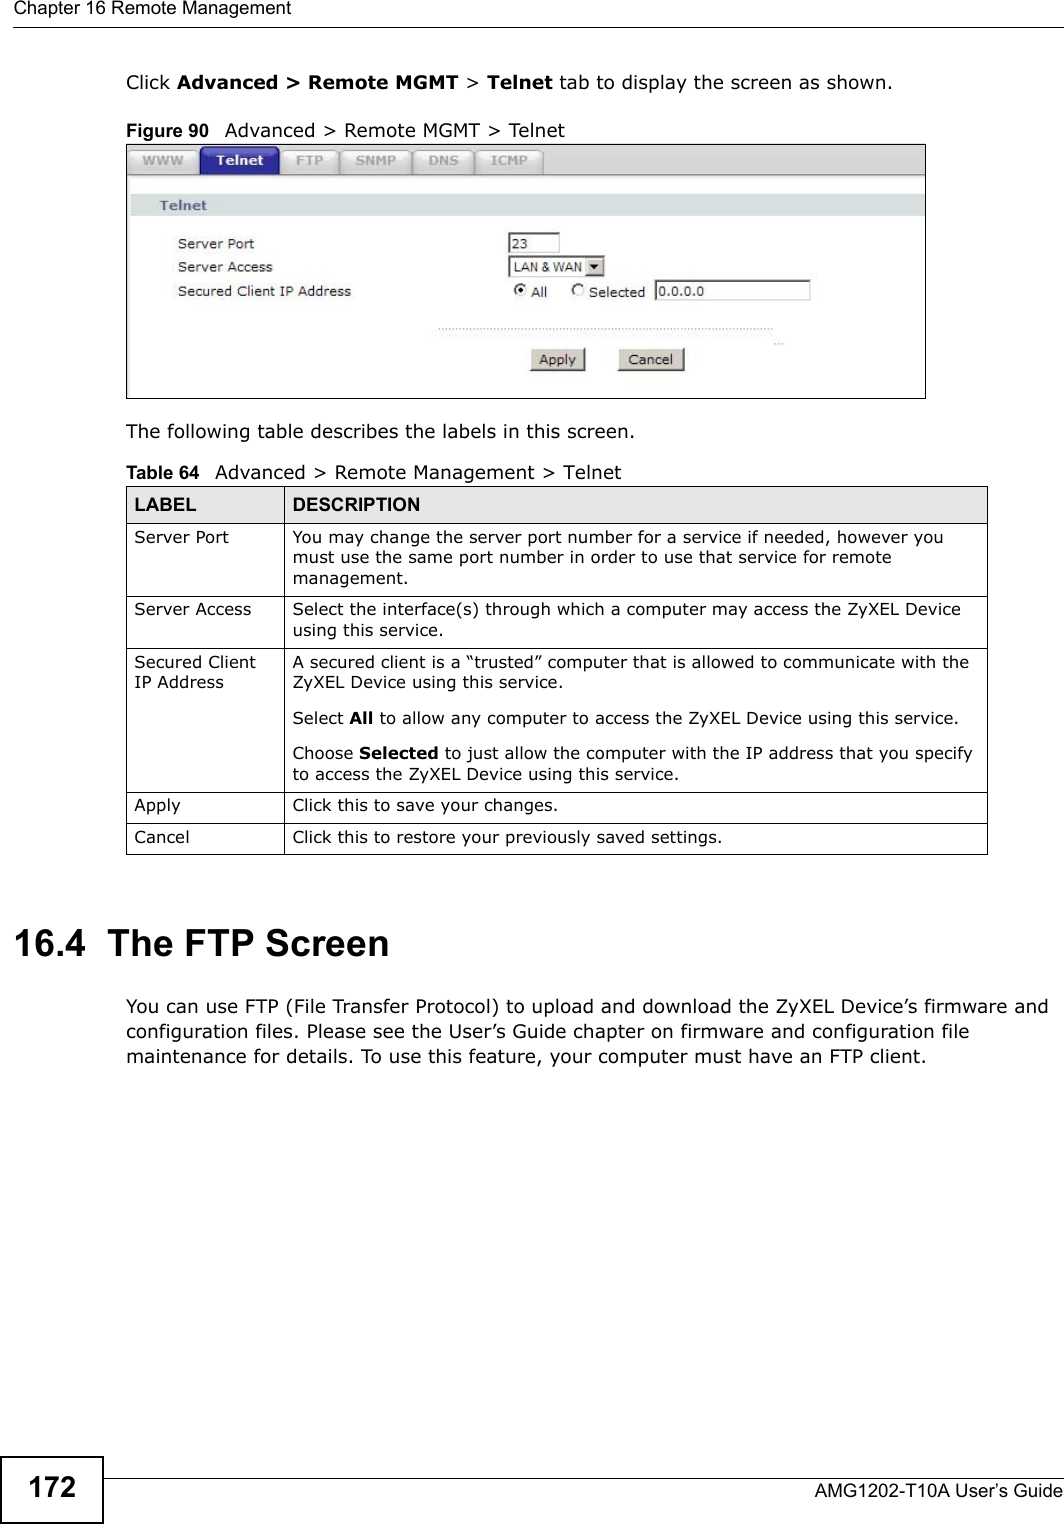 Chapter 16 Remote ManagementAMG1202-T10A User’s Guide172Click Advanced &gt; Remote MGMT &gt; Telnet tab to display the screen as shown. Figure 90   Advanced &gt; Remote MGMT &gt; TelnetThe following table describes the labels in this screen.16.4  The FTP Screen You can use FTP (File Transfer Protocol) to upload and download the ZyXEL Device’s firmware and configuration files. Please see the User’s Guide chapter on firmware and configuration file maintenance for details. To use this feature, your computer must have an FTP client.Table 64   Advanced &gt; Remote Management &gt; TelnetLABEL DESCRIPTIONServer Port You may change the server port number for a service if needed, however you must use the same port number in order to use that service for remote management.Server Access Select the interface(s) through which a computer may access the ZyXEL Device using this service.Secured Client IP AddressA secured client is a “trusted” computer that is allowed to communicate with the ZyXEL Device using this service. Select All to allow any computer to access the ZyXEL Device using this service.Choose Selected to just allow the computer with the IP address that you specify to access the ZyXEL Device using this service.Apply Click this to save your changes.Cancel Click this to restore your previously saved settings.